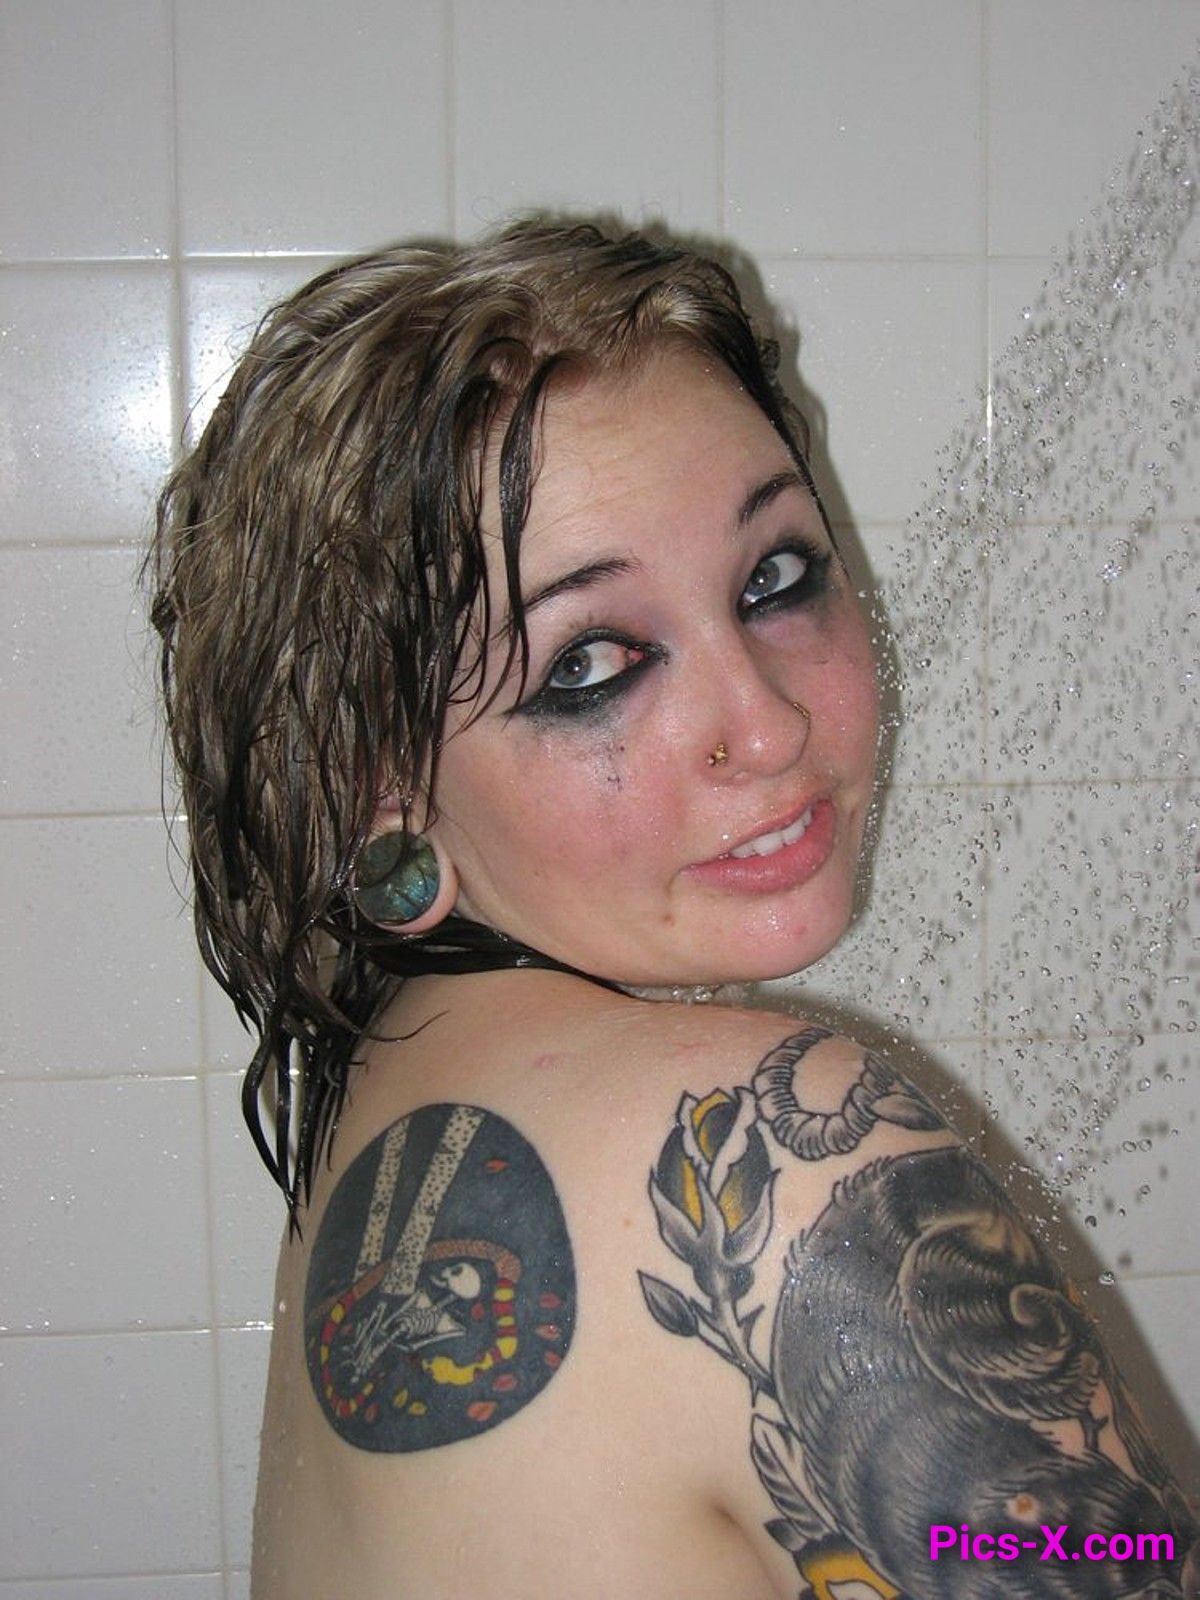 Tattooed girl with running makeup posing naked at home - Punk Rock Girlfriend - Image 32